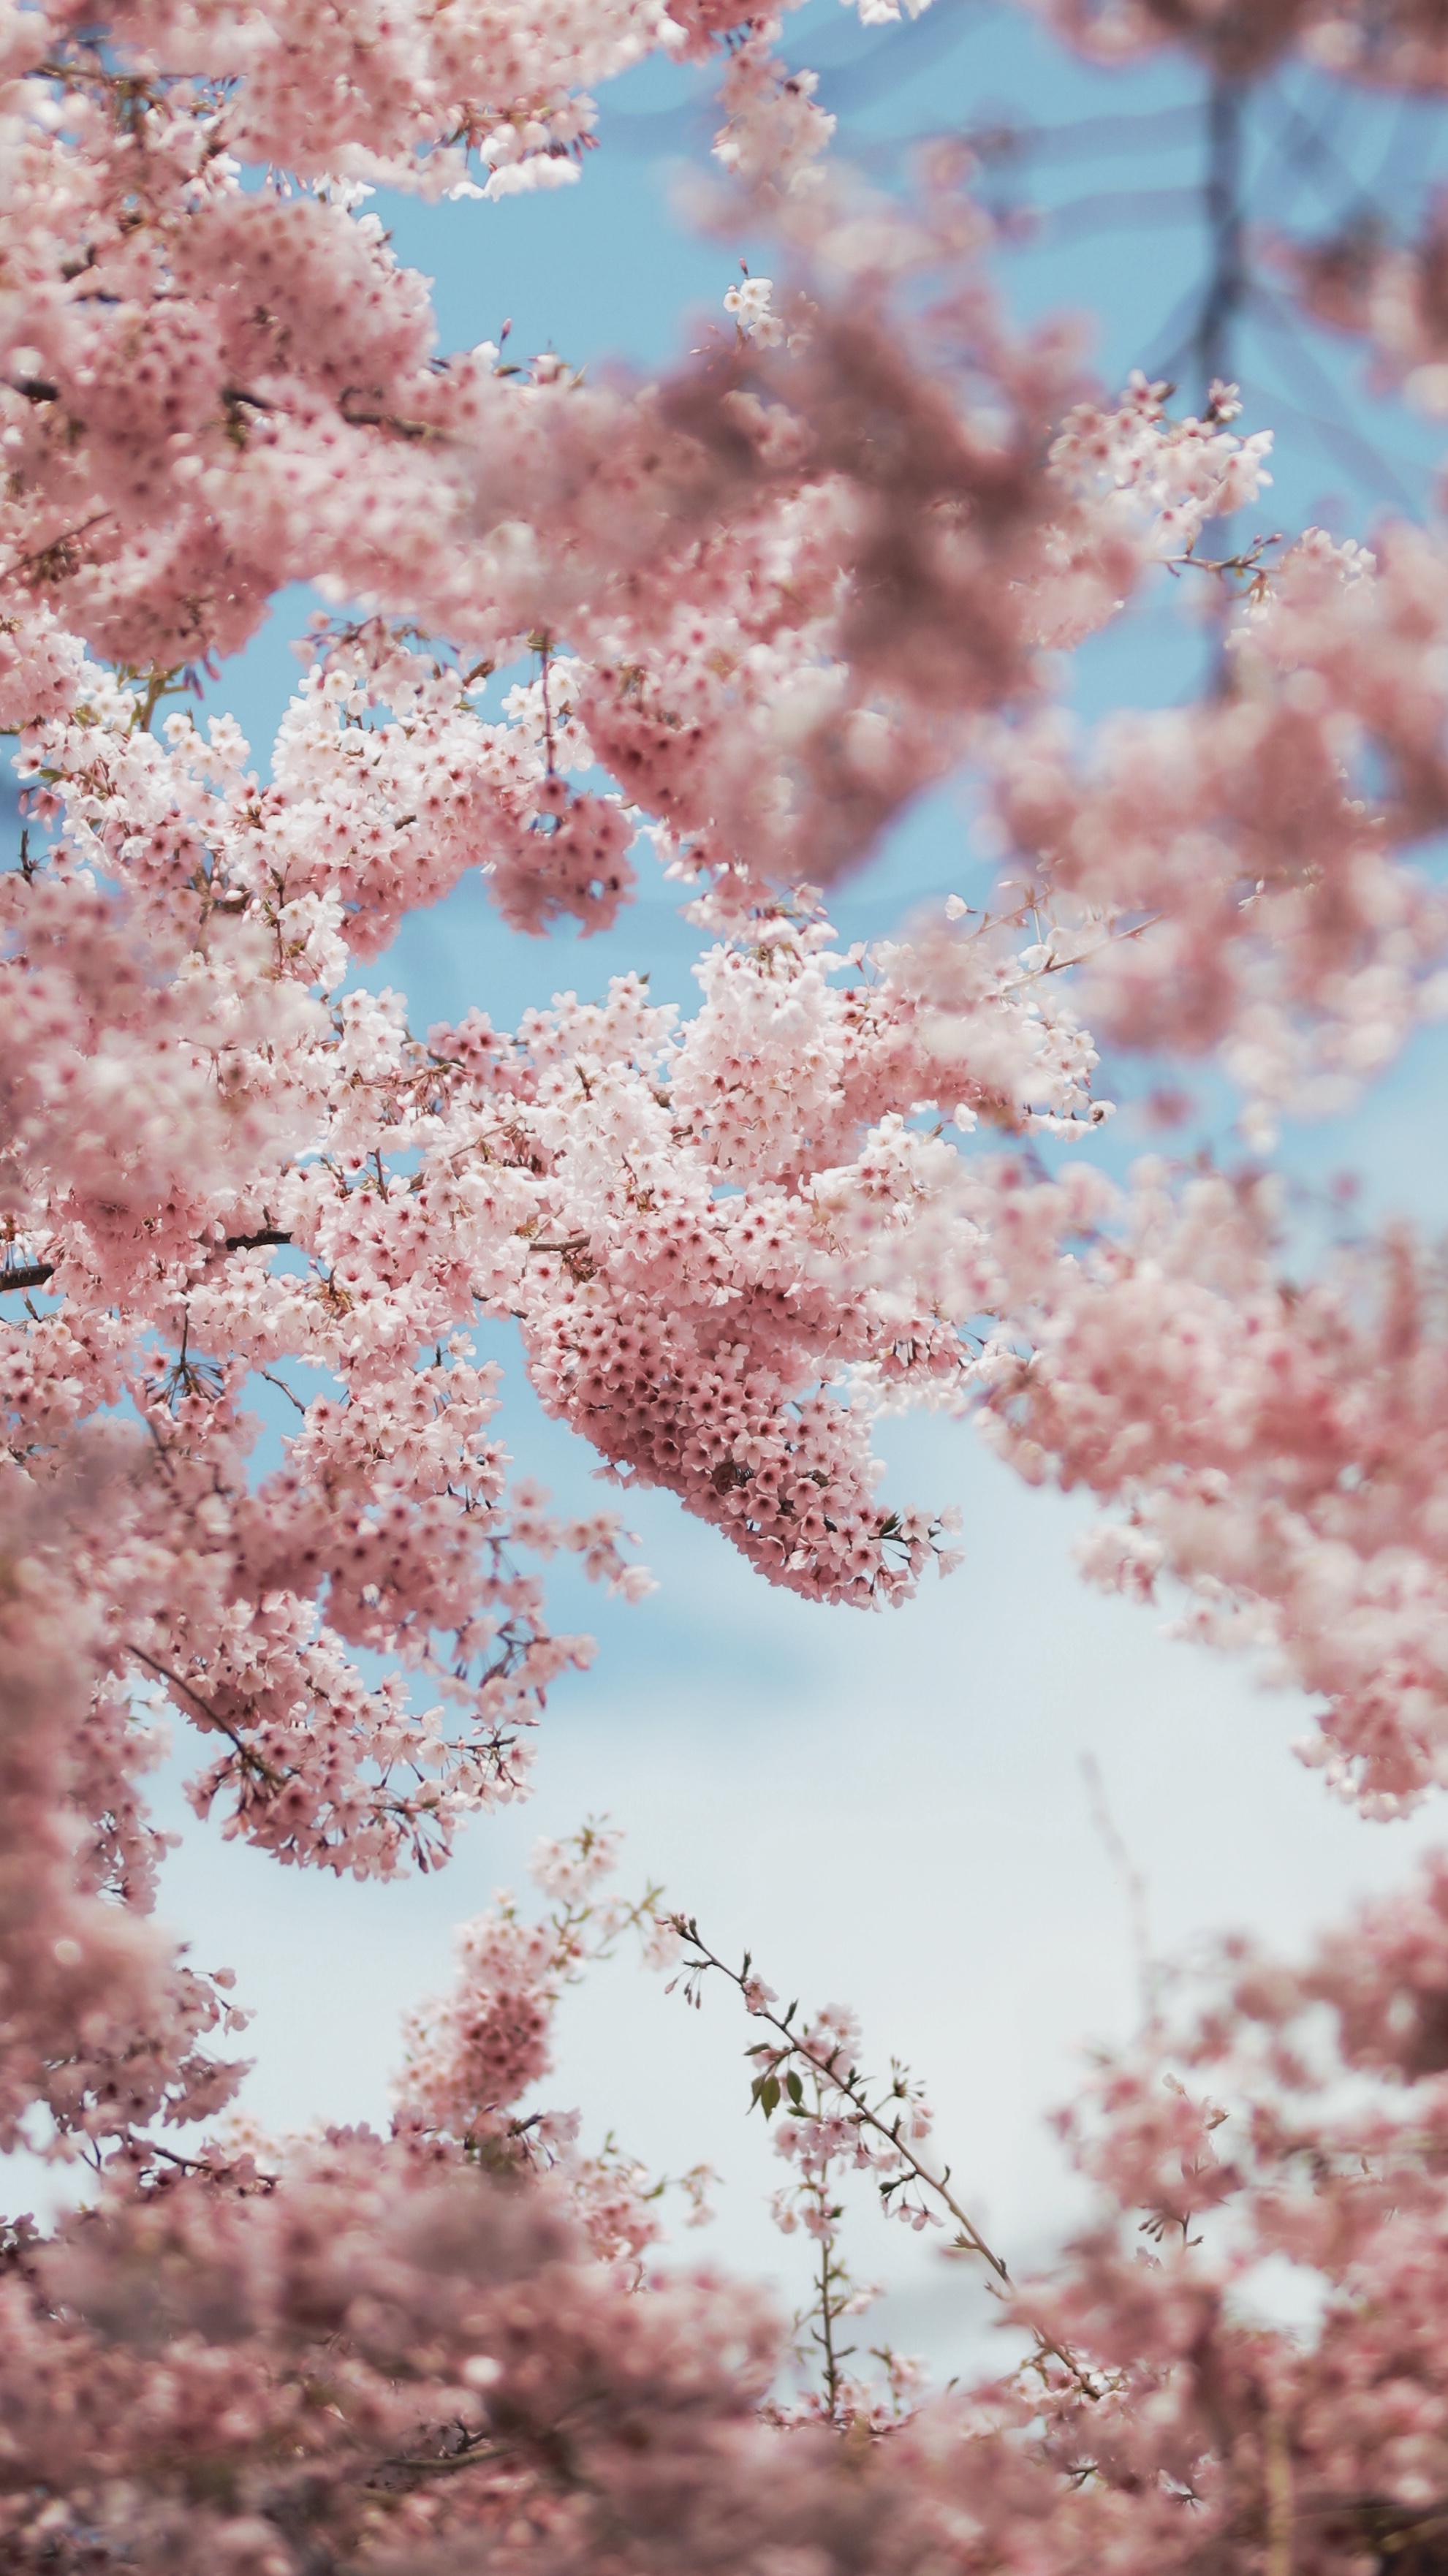 Aesthetic Cherry Blossoms Wallpapers